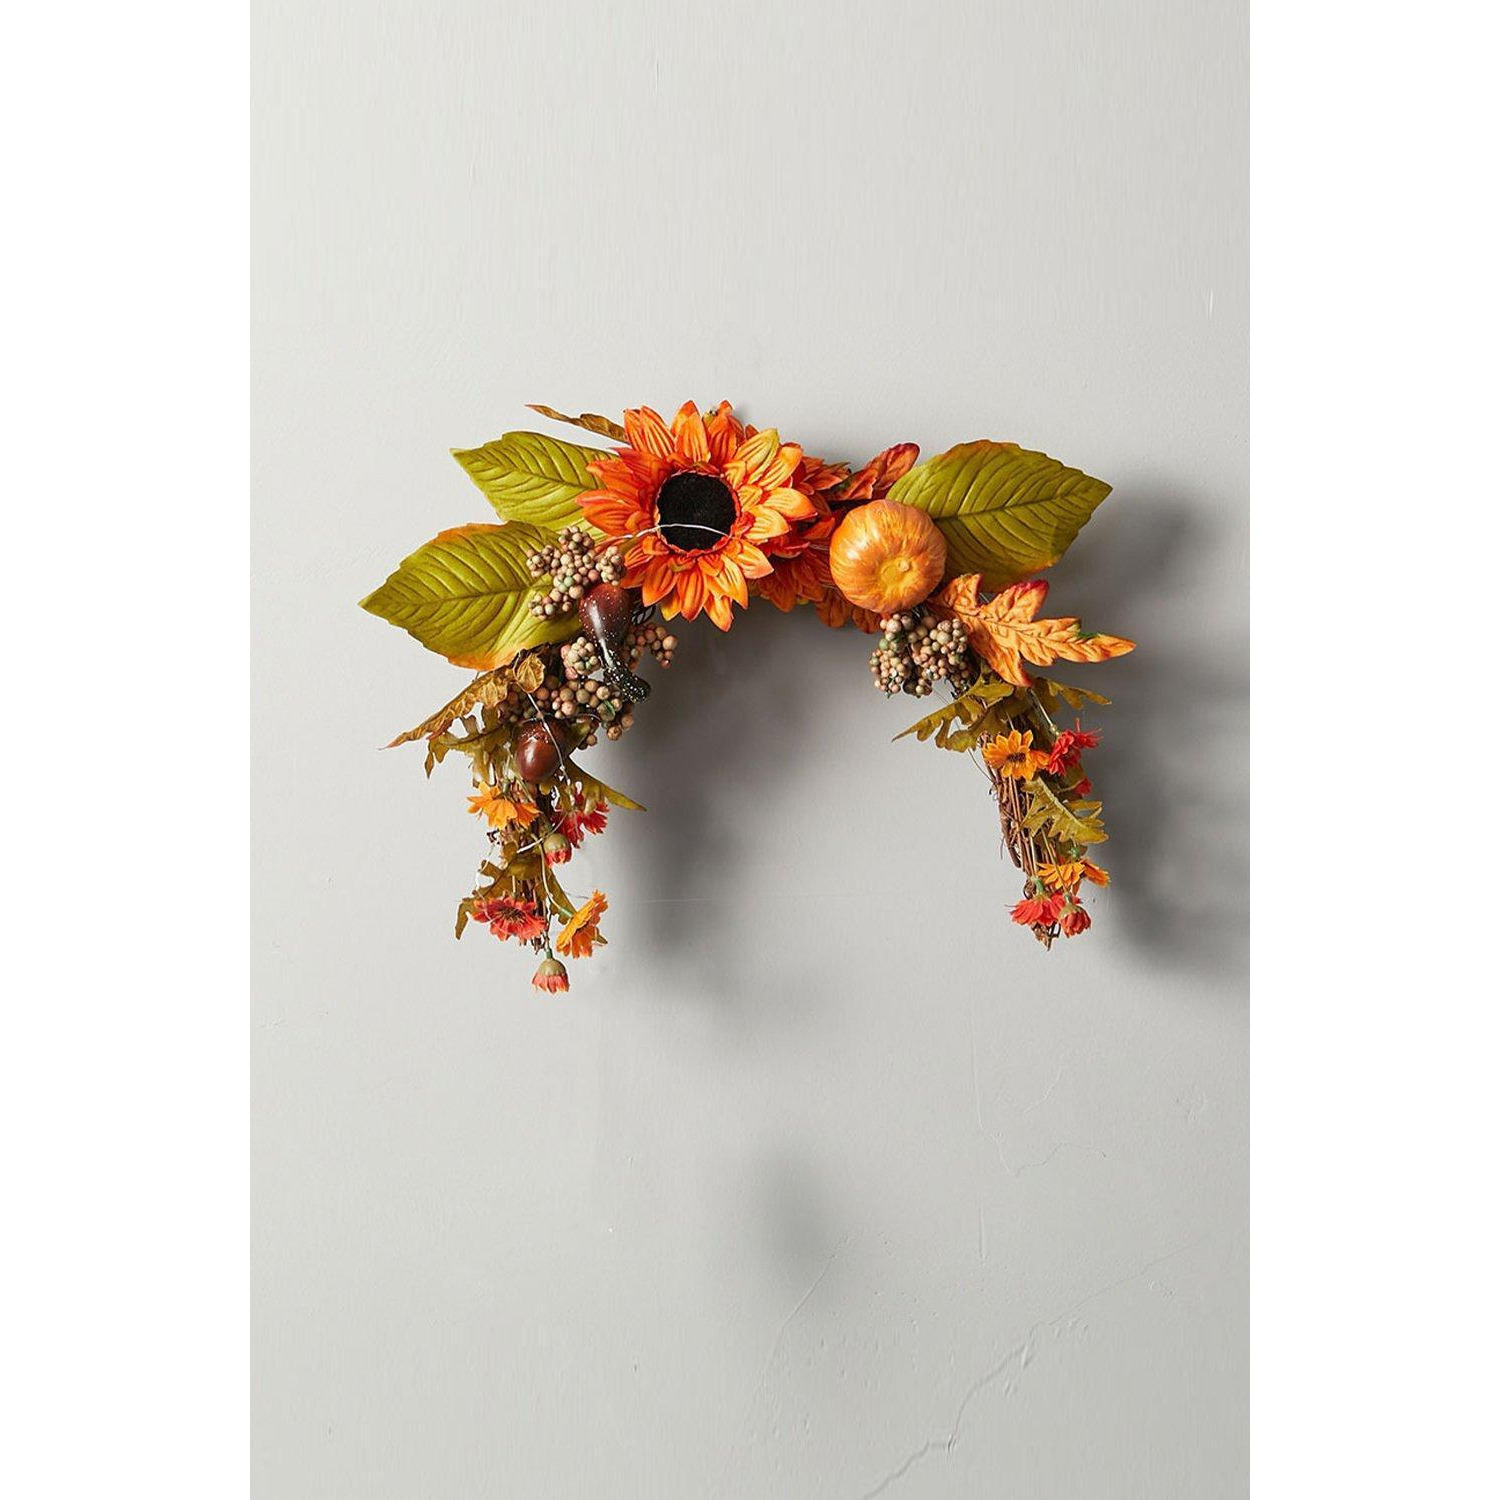 Artificial Sunflower Swag Wreath with Pumpkins for Halloween Hanging Decoration - image 1